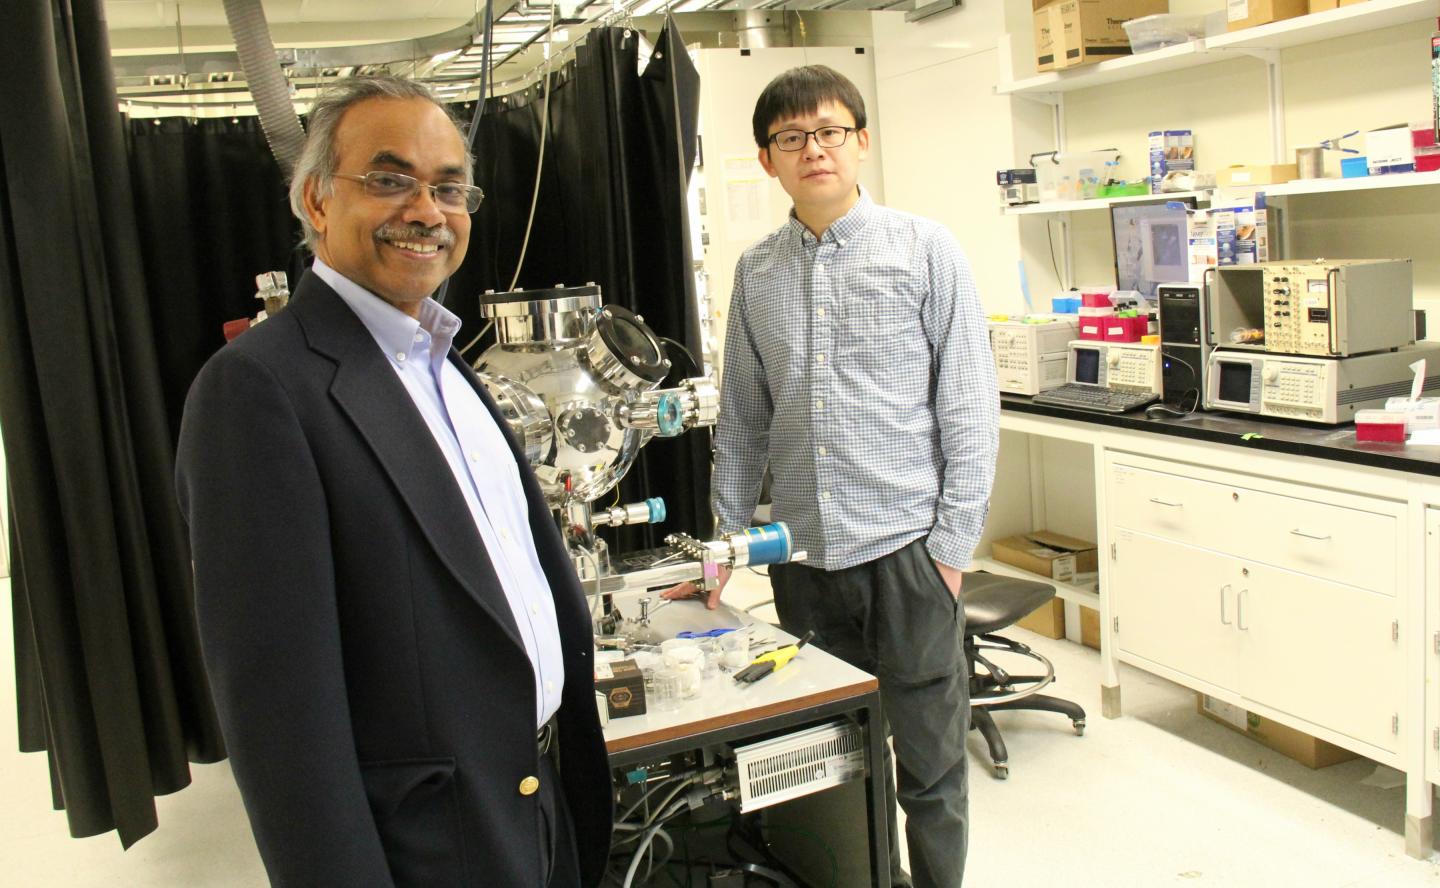 University of Alberta researcher Thomas Thundat and PhD student Jun Liu have made a major advance in the development of triboelectric nano generators. These devices can turn small amounts of mechanical energy, like vibrations, into a steady DC power current. The nanogenerators can power small handheld devices or sensors that monitor anything from pipelines to medical implants. (Source: UAlberta Engineering)